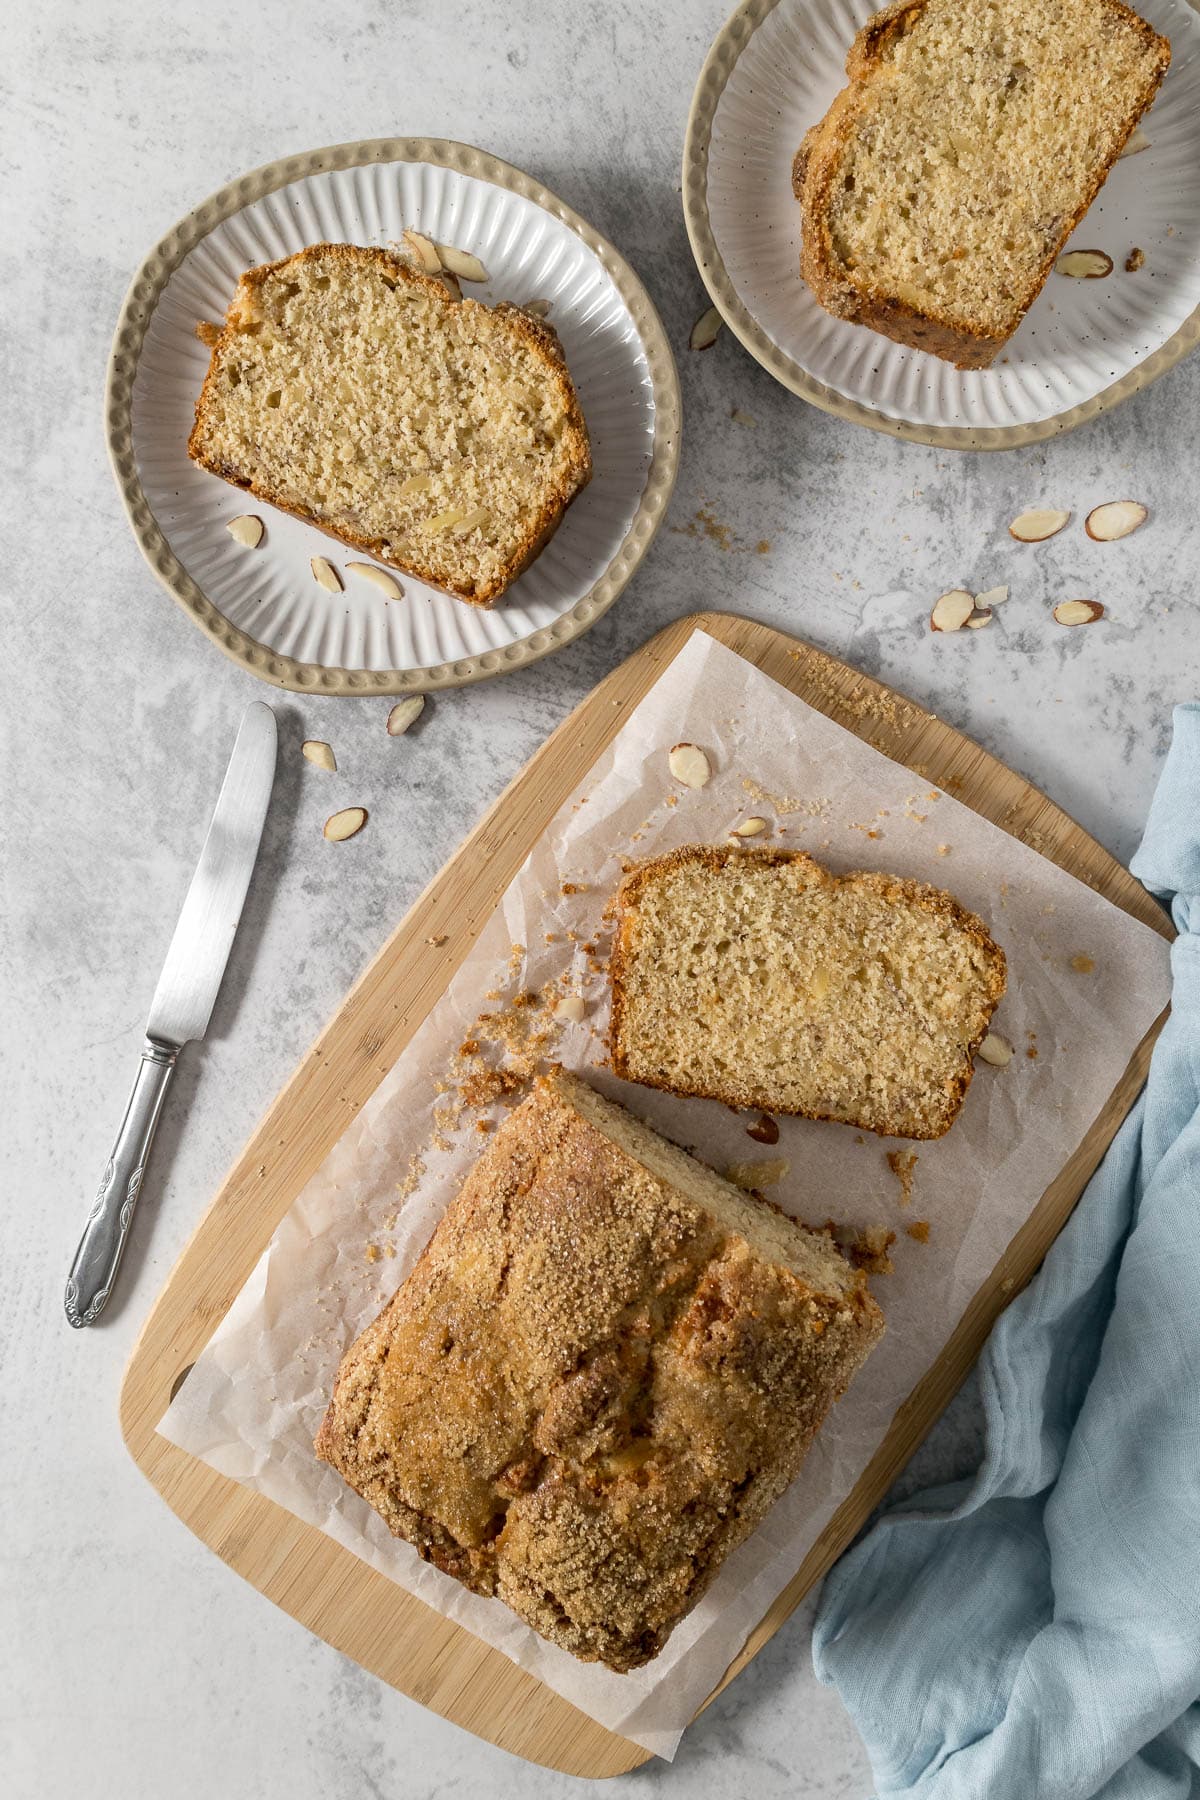 Slice of banana bread with almonds on a plate.